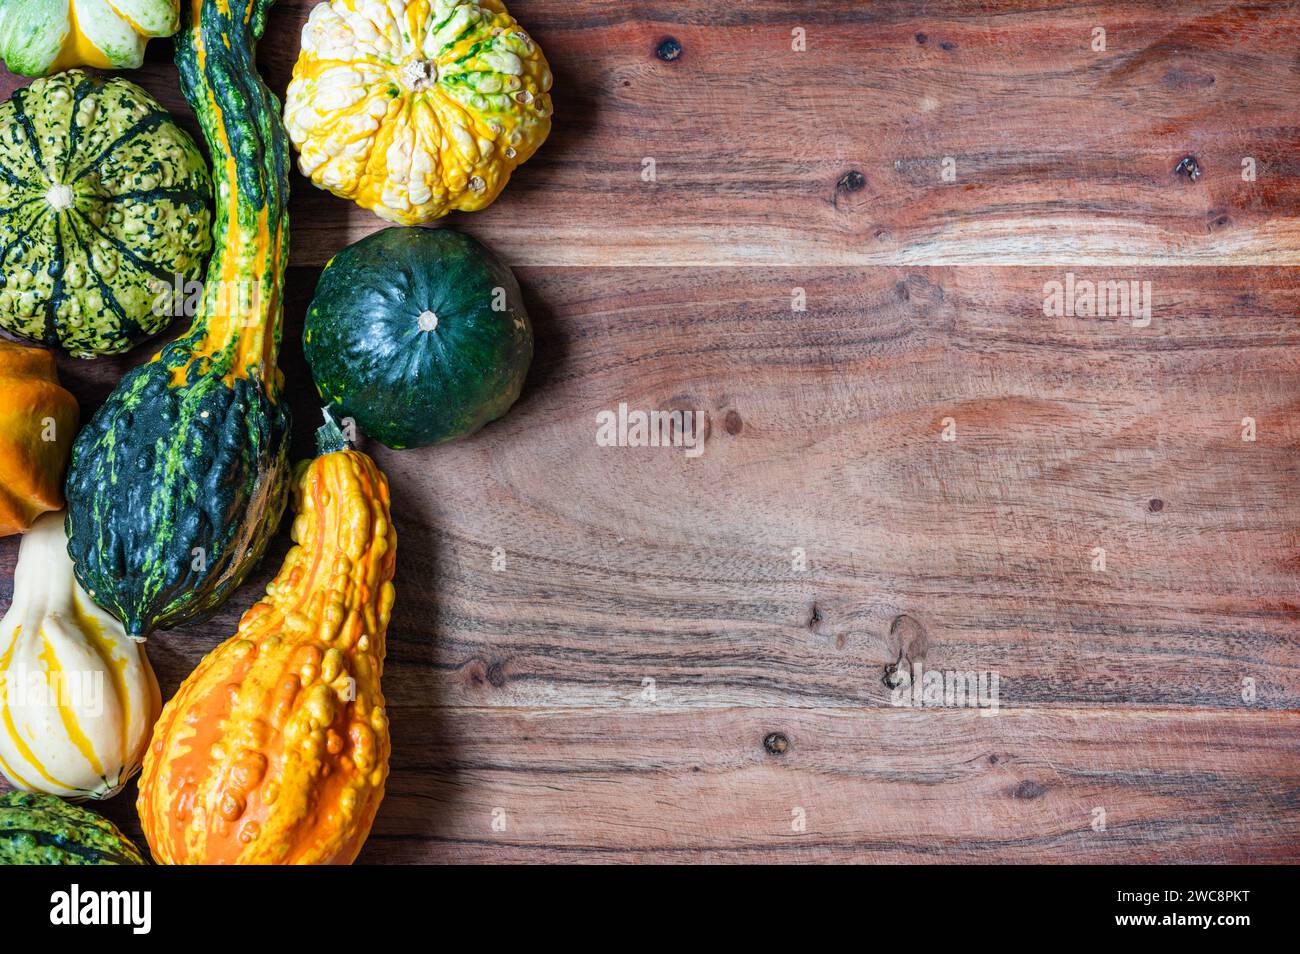 Variety of gourds on left side of wood cutting board Stock Photo